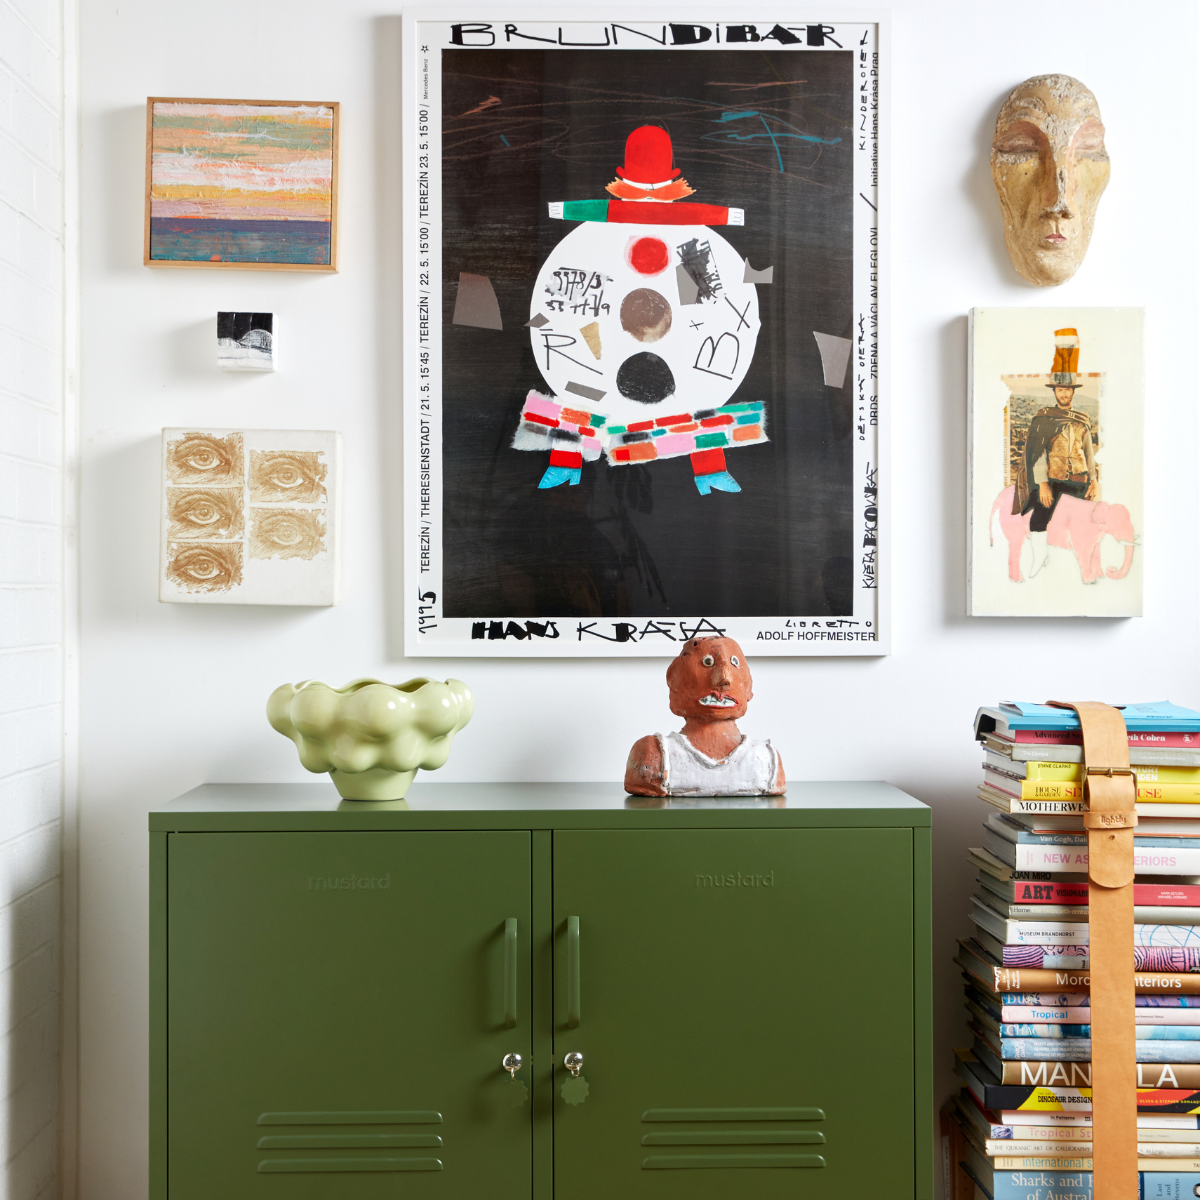 An olive green locker houses some ceramics and sits next to a tall stack of books bound by a leather belt. Bright artworks are featured on the wall.